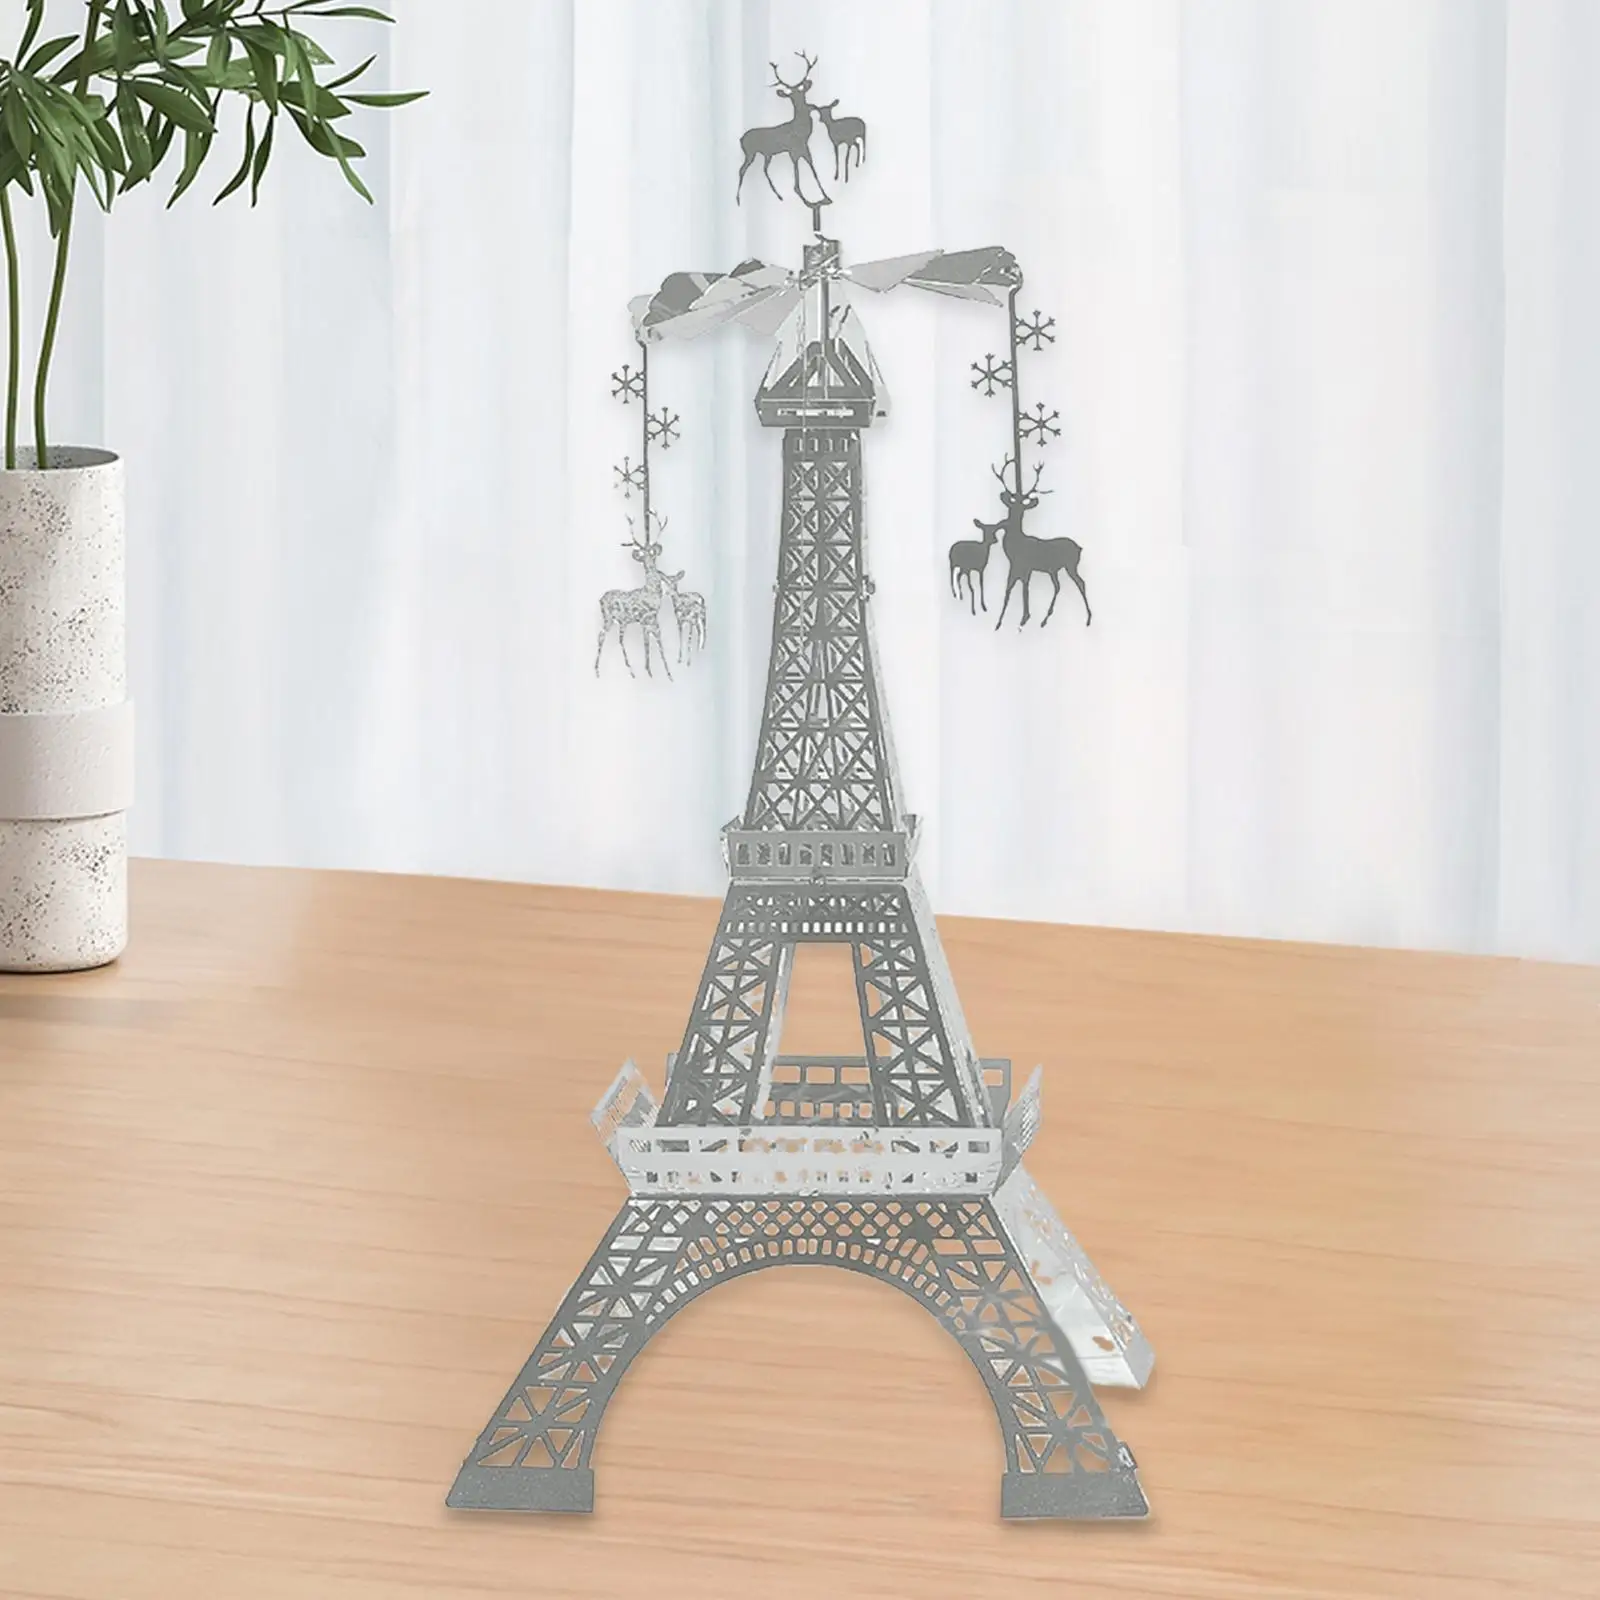 Eiffel Tower Figurine Candle Holder Table Crafts Adornment for Valentine Day Lovely Decor Home Party Supplies